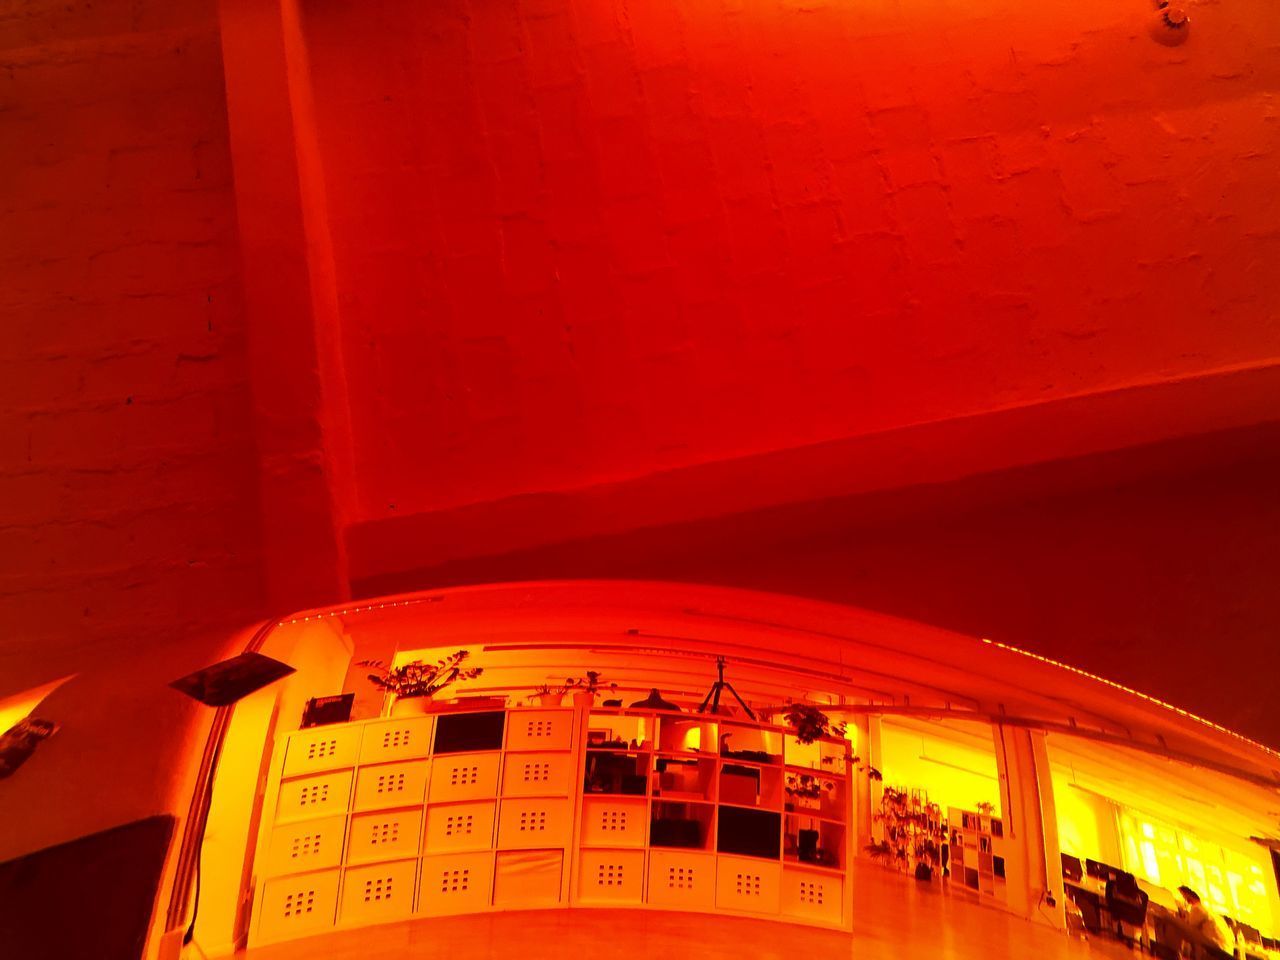 LOW ANGLE VIEW OF ILLUMINATED BUILDING IN ORANGE WALL